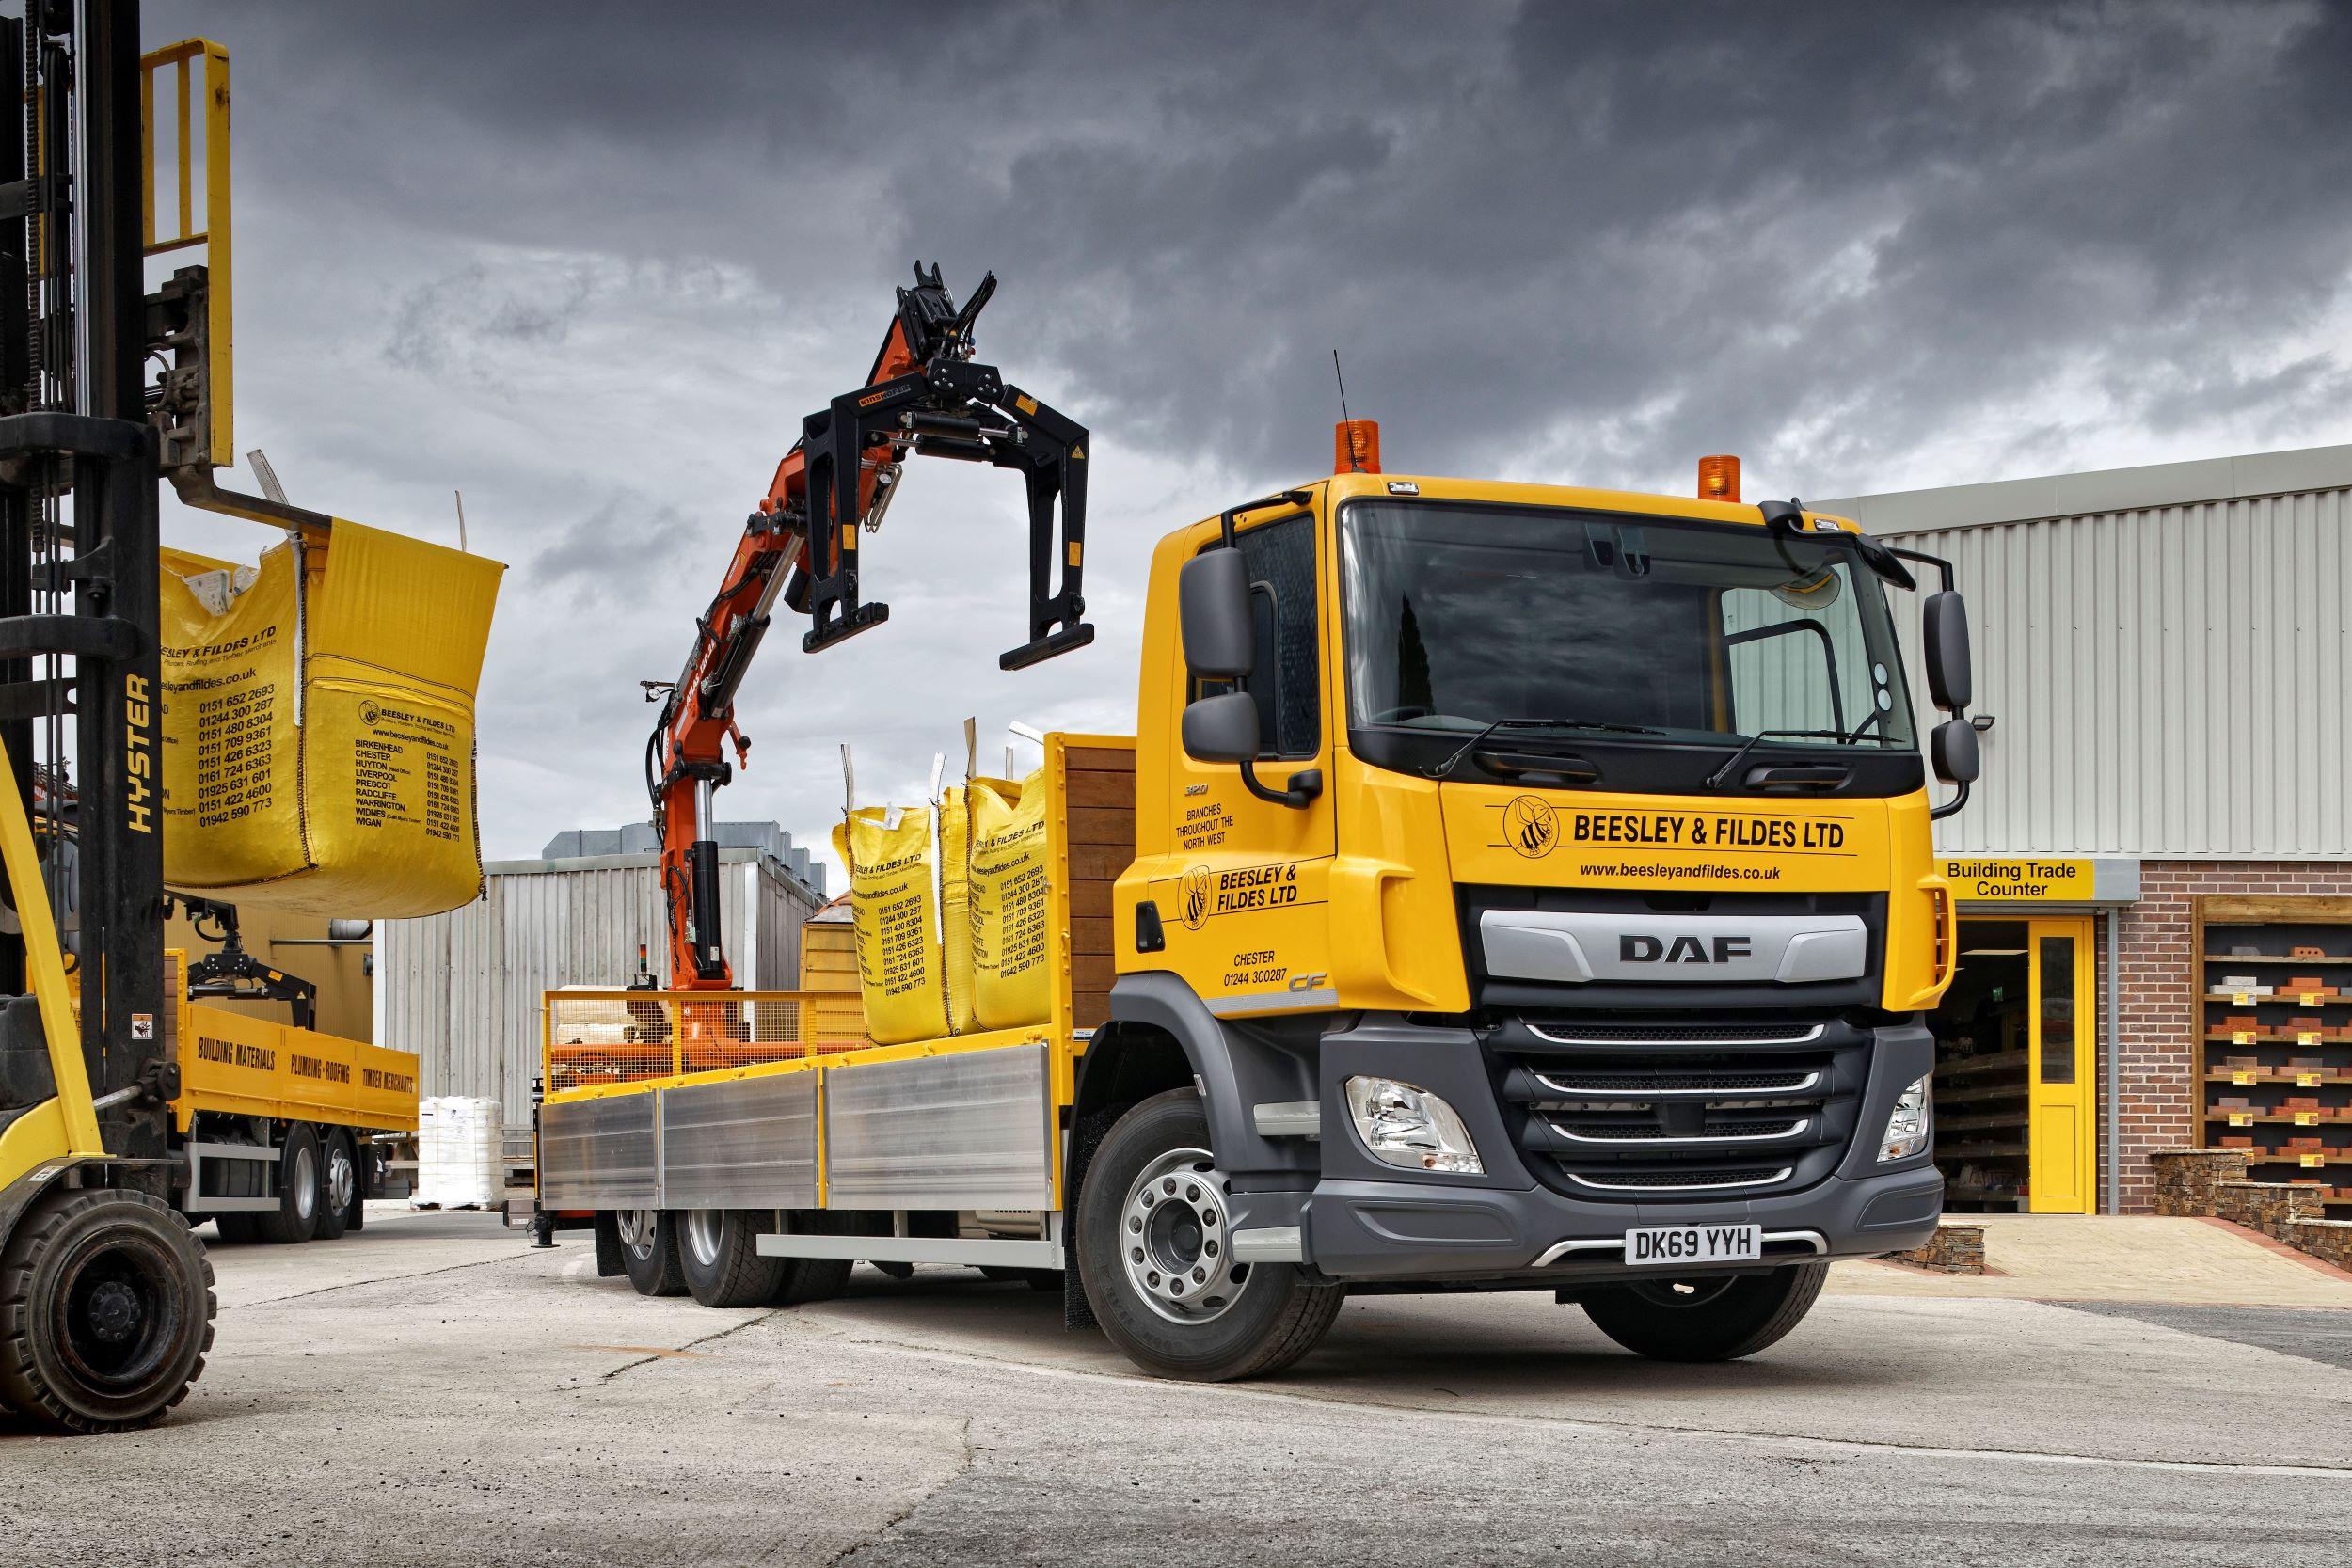 Beesley & Fildes has invested £2m into its vehicle fleet, which has seen it introduce more environmentally-friendly trucks that comply with the clean air zones being implemented by the Government across the UK.